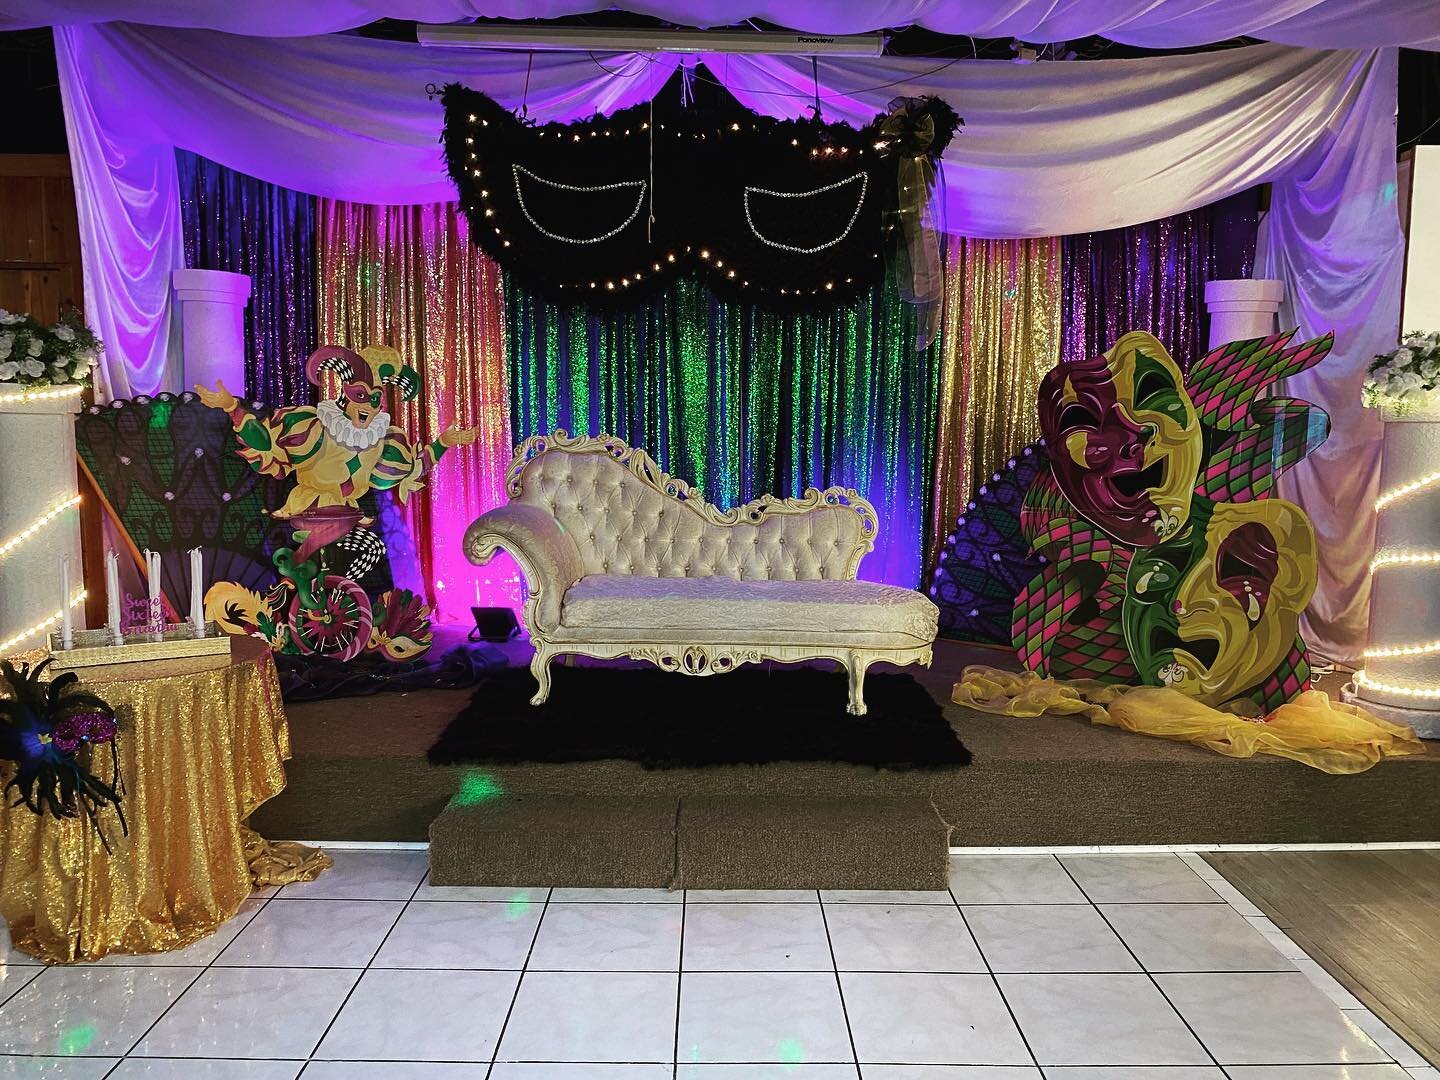 #mardigras theme for your next #quince #sweet16 @illusionsbanquethall @kissimmeemainst #kissimmee